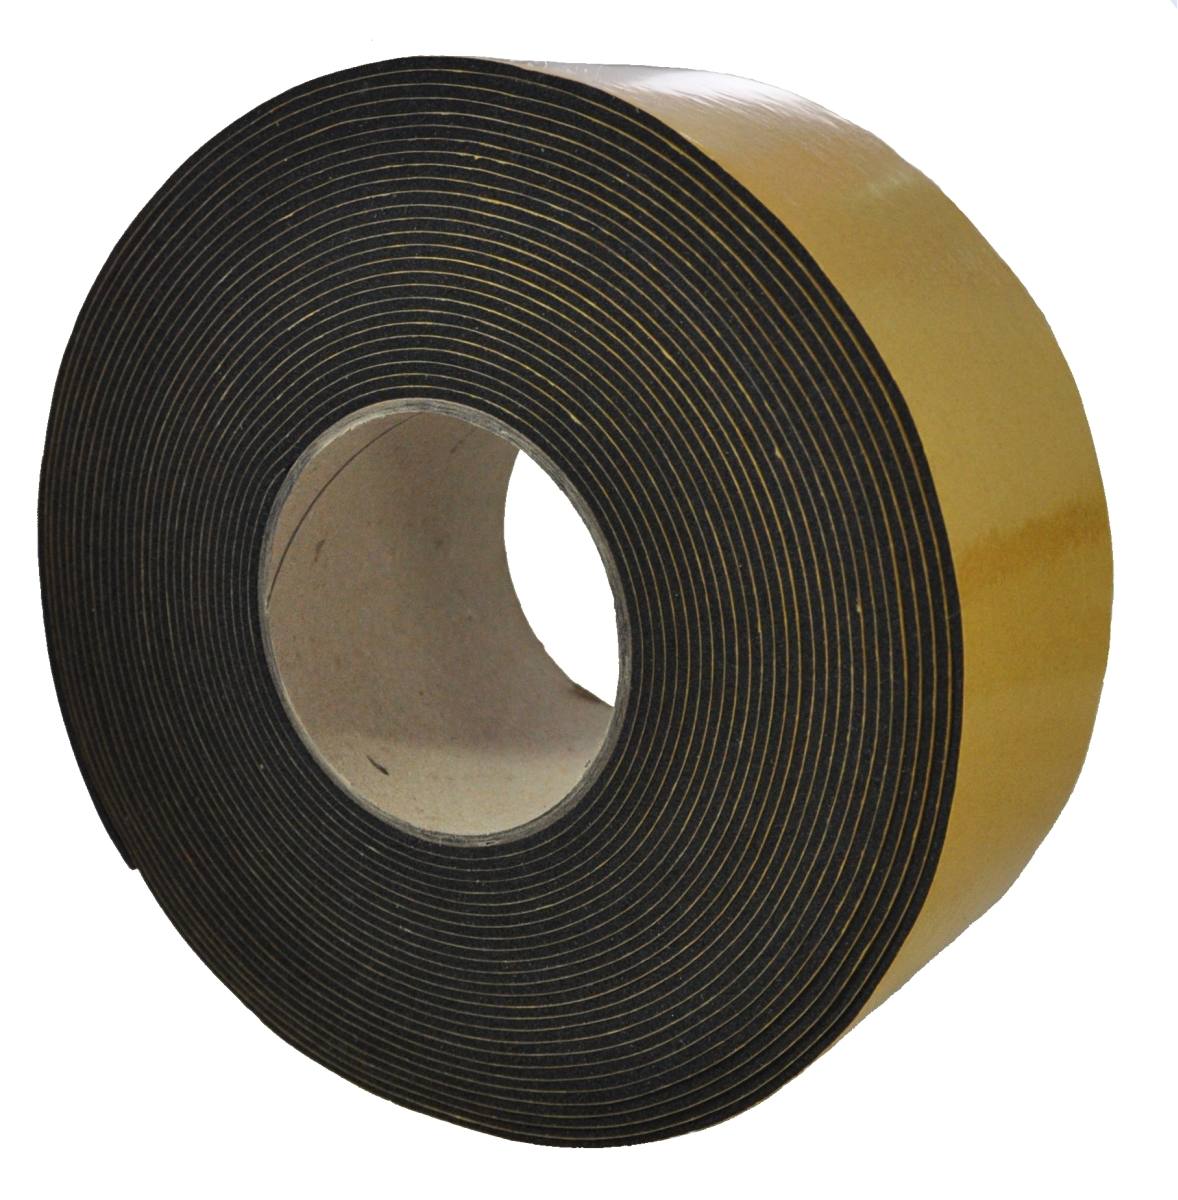 S-K-S EPDM 1mmx25mmx10m black self-adhesive on one side